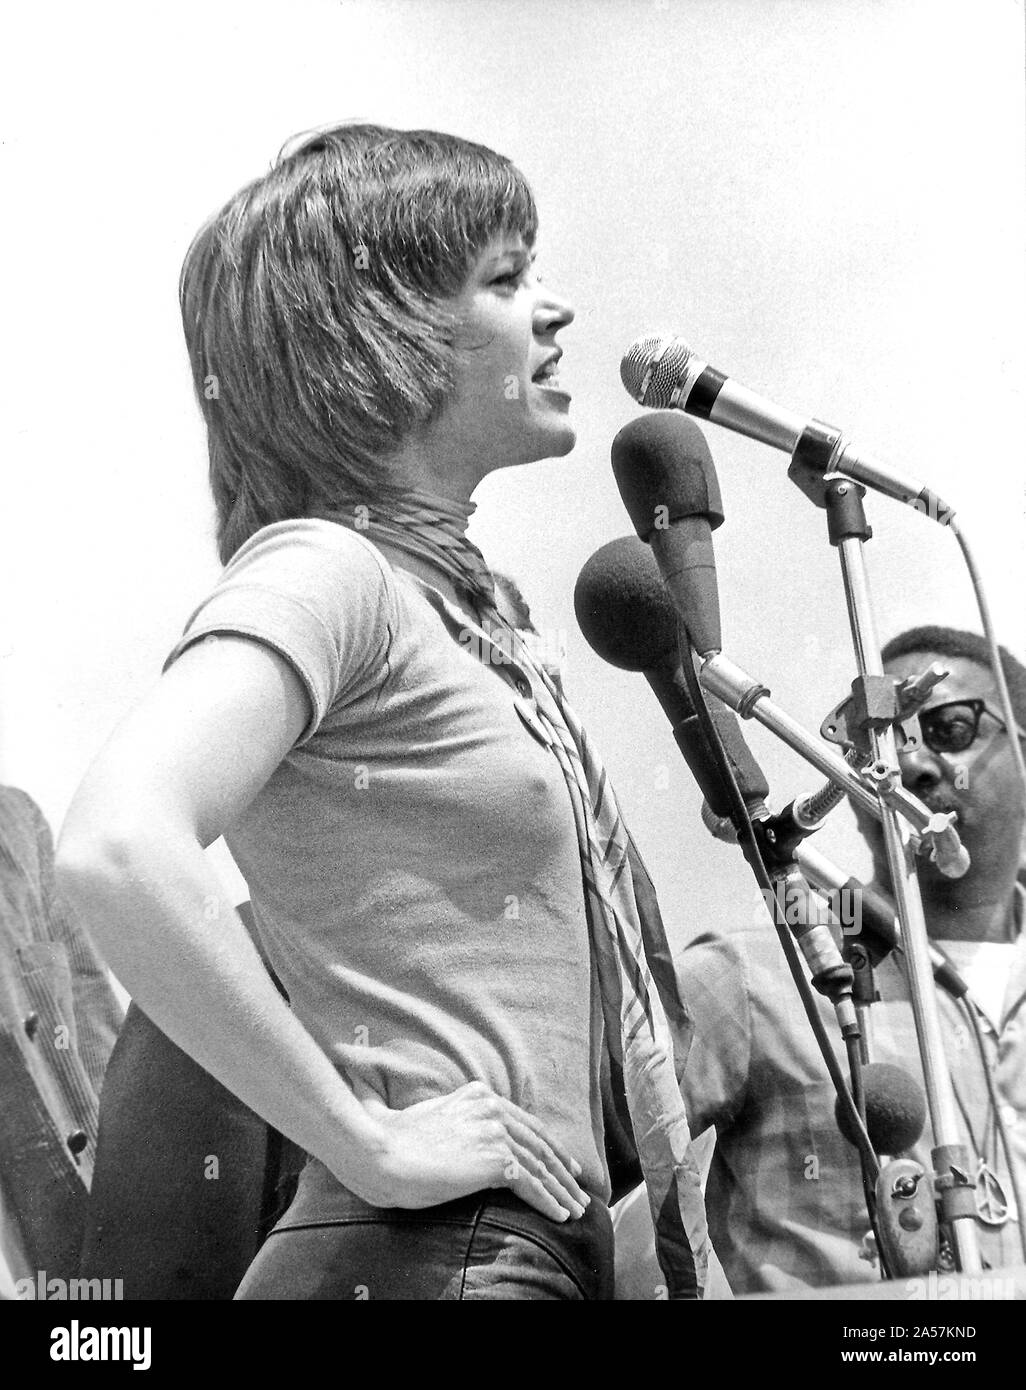 Actress Jane Fonda is shown as she addressed the estimated 100,000 people who attended the anti-war rally by the White House. The Demonstration was generally non-violent save for scattered outbreaks along Pennsylvania Avenue near the Department of Justice Building in Washington, DC on May 9, 1970.Credit: Benjamin E. 'Gene' Forte - CNP | usage worldwide Stock Photo